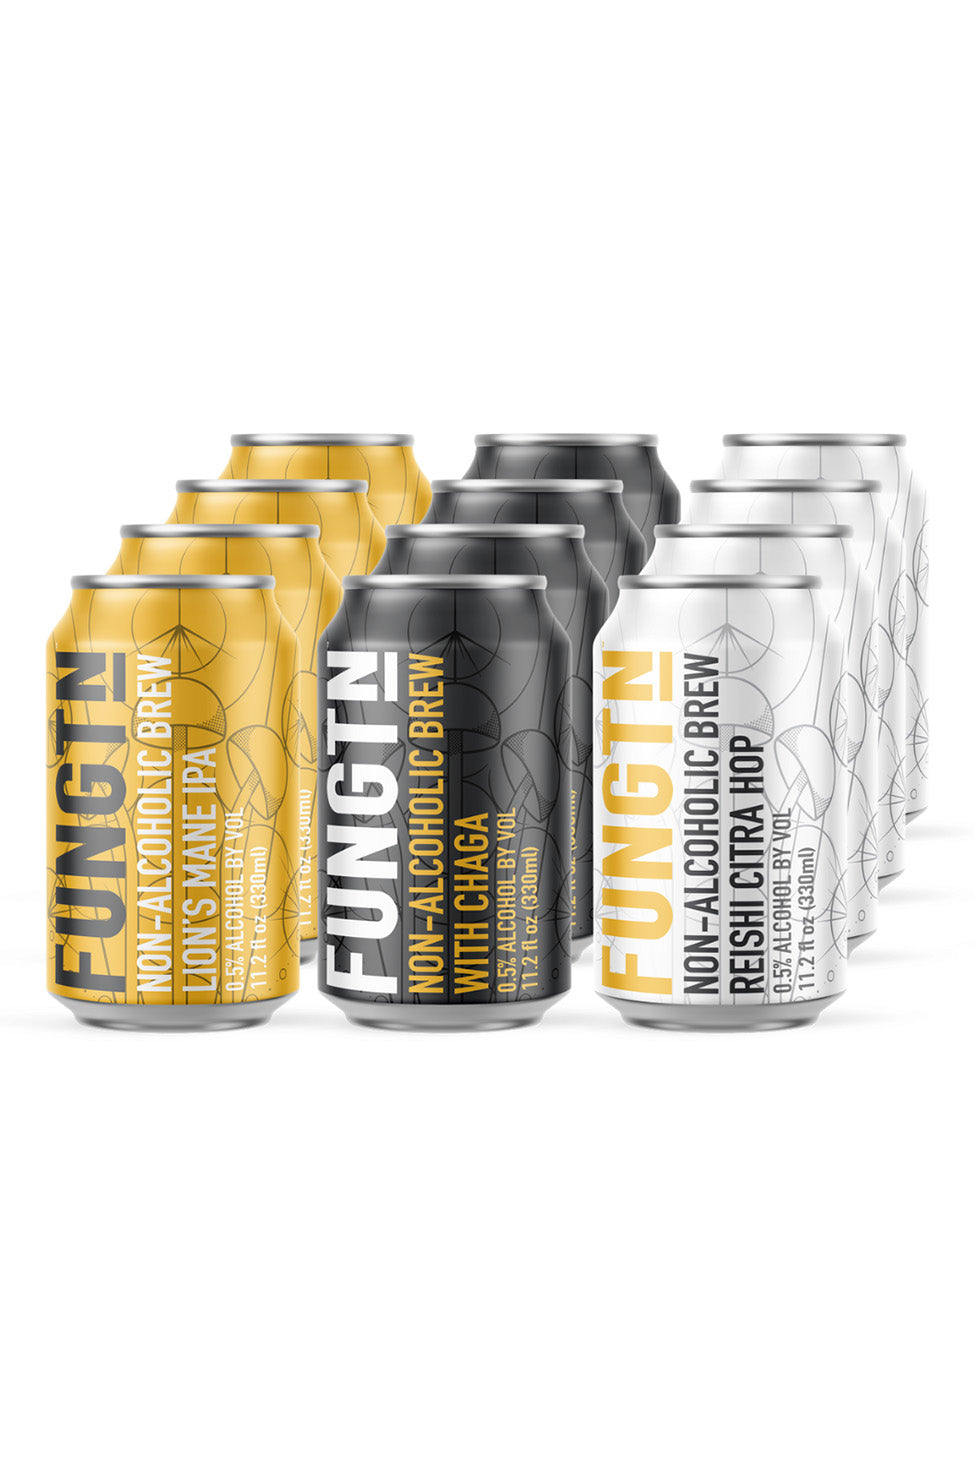 Fungtn Beer Bundle - Non Alcoholic Beer 12-pack